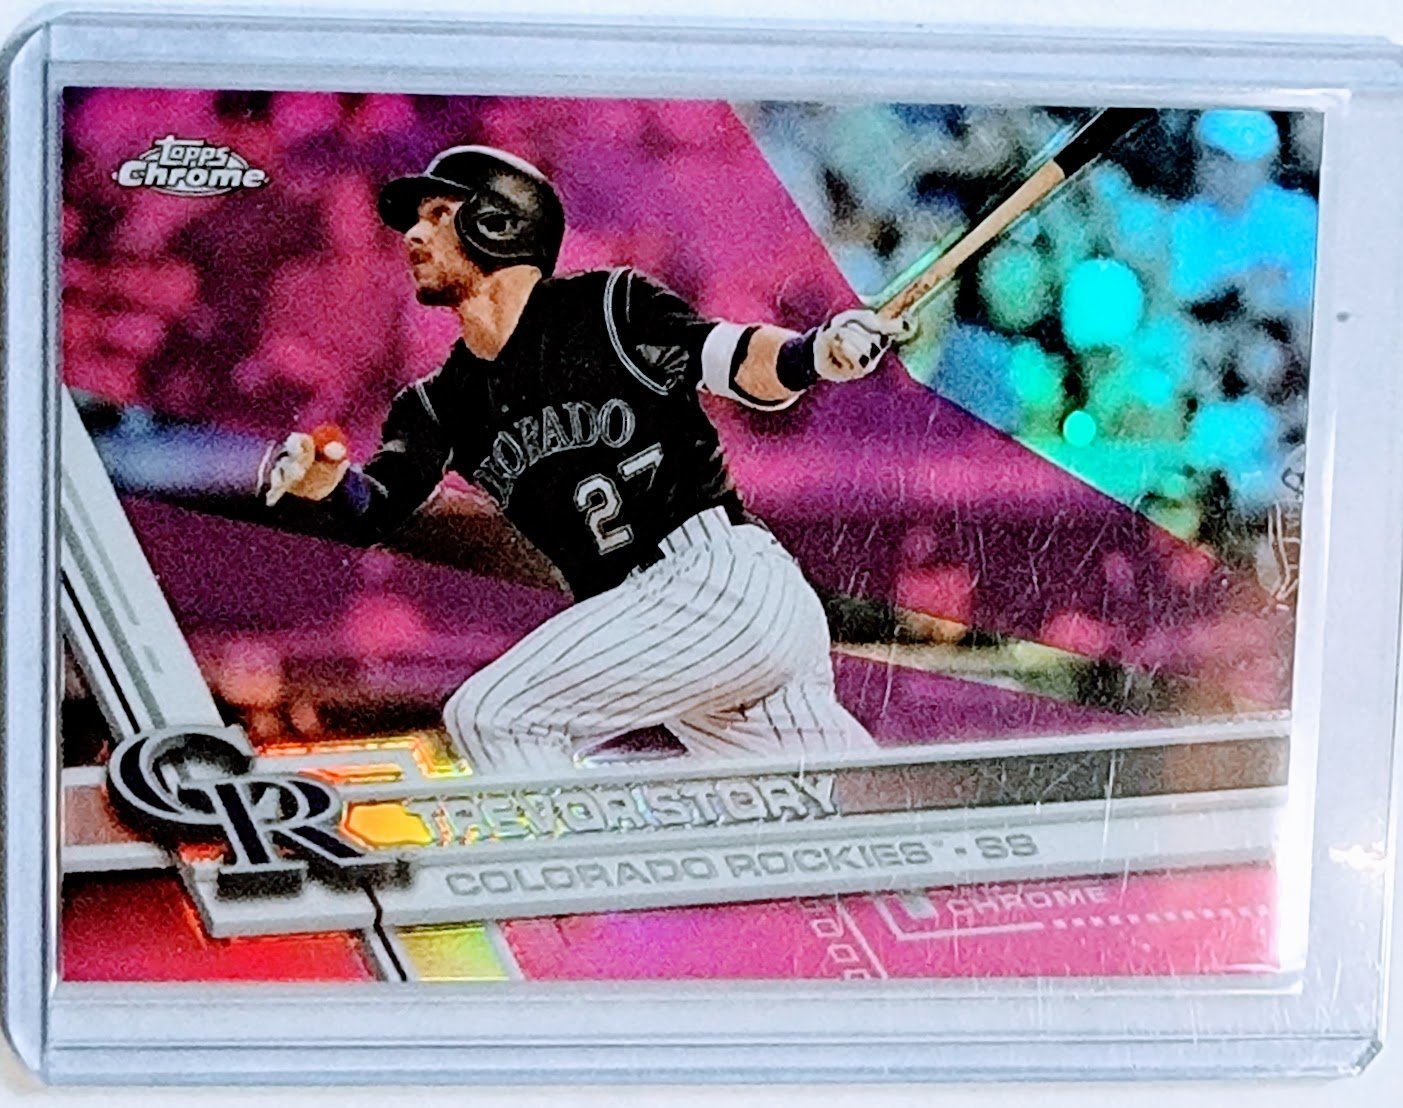 2017 Topps Chrome Trevor Story Pink Refractor Baseball Card TPTV simple Xclusive Collectibles   